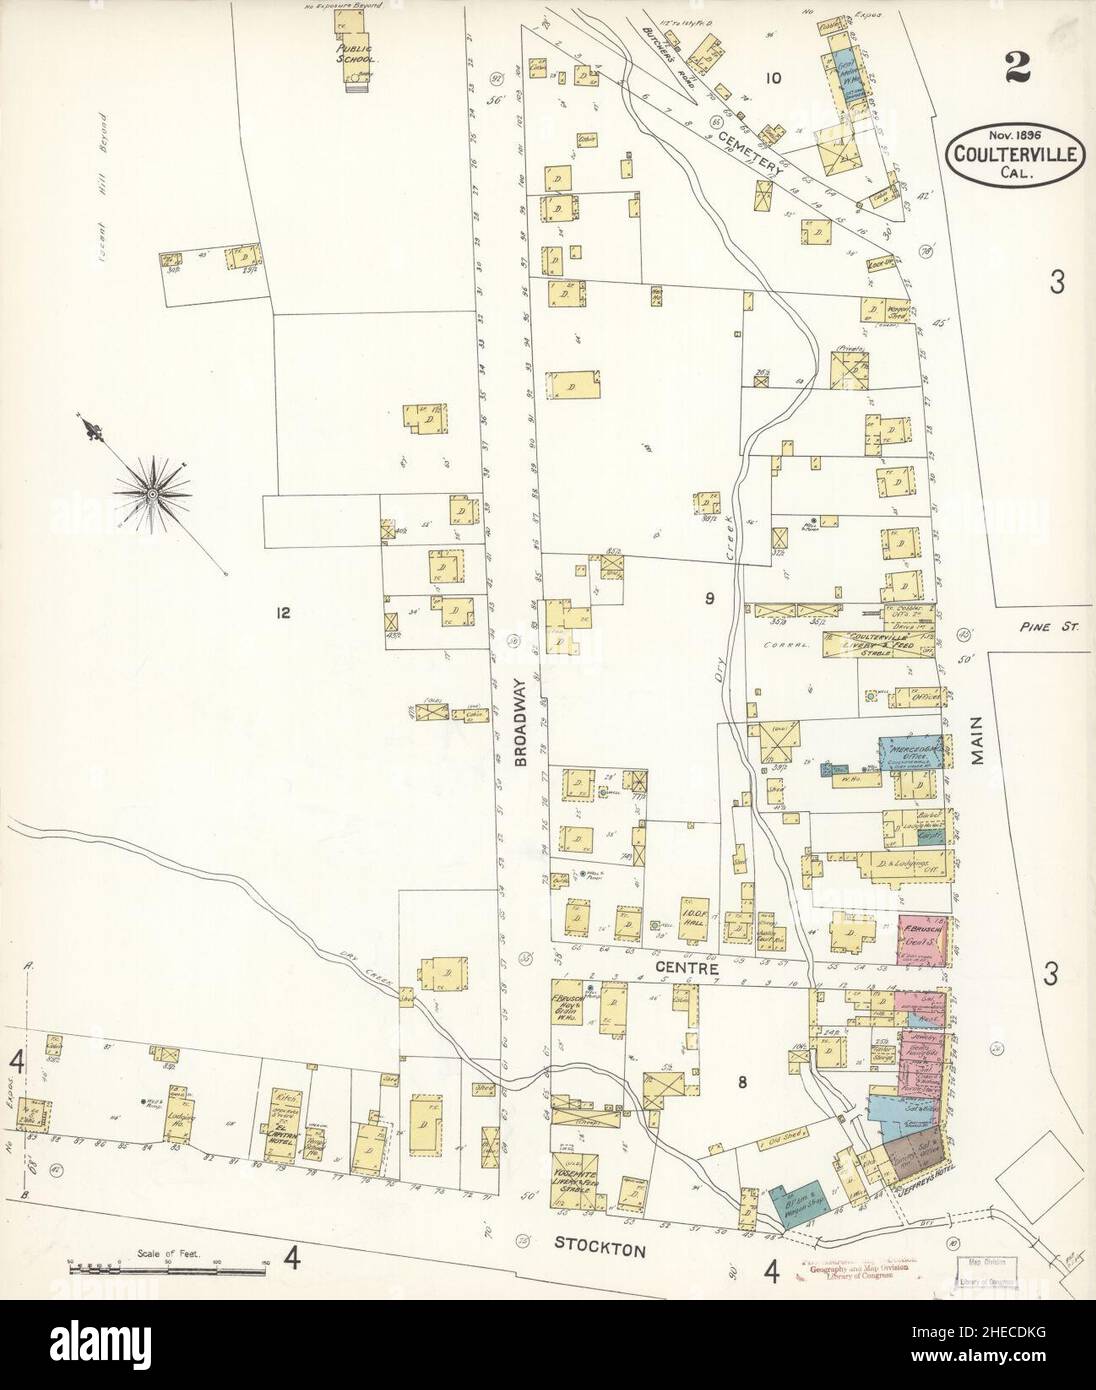 Sanborn Fire Insurance Map from Coulterville, Mariposa County, California. Stock Photo